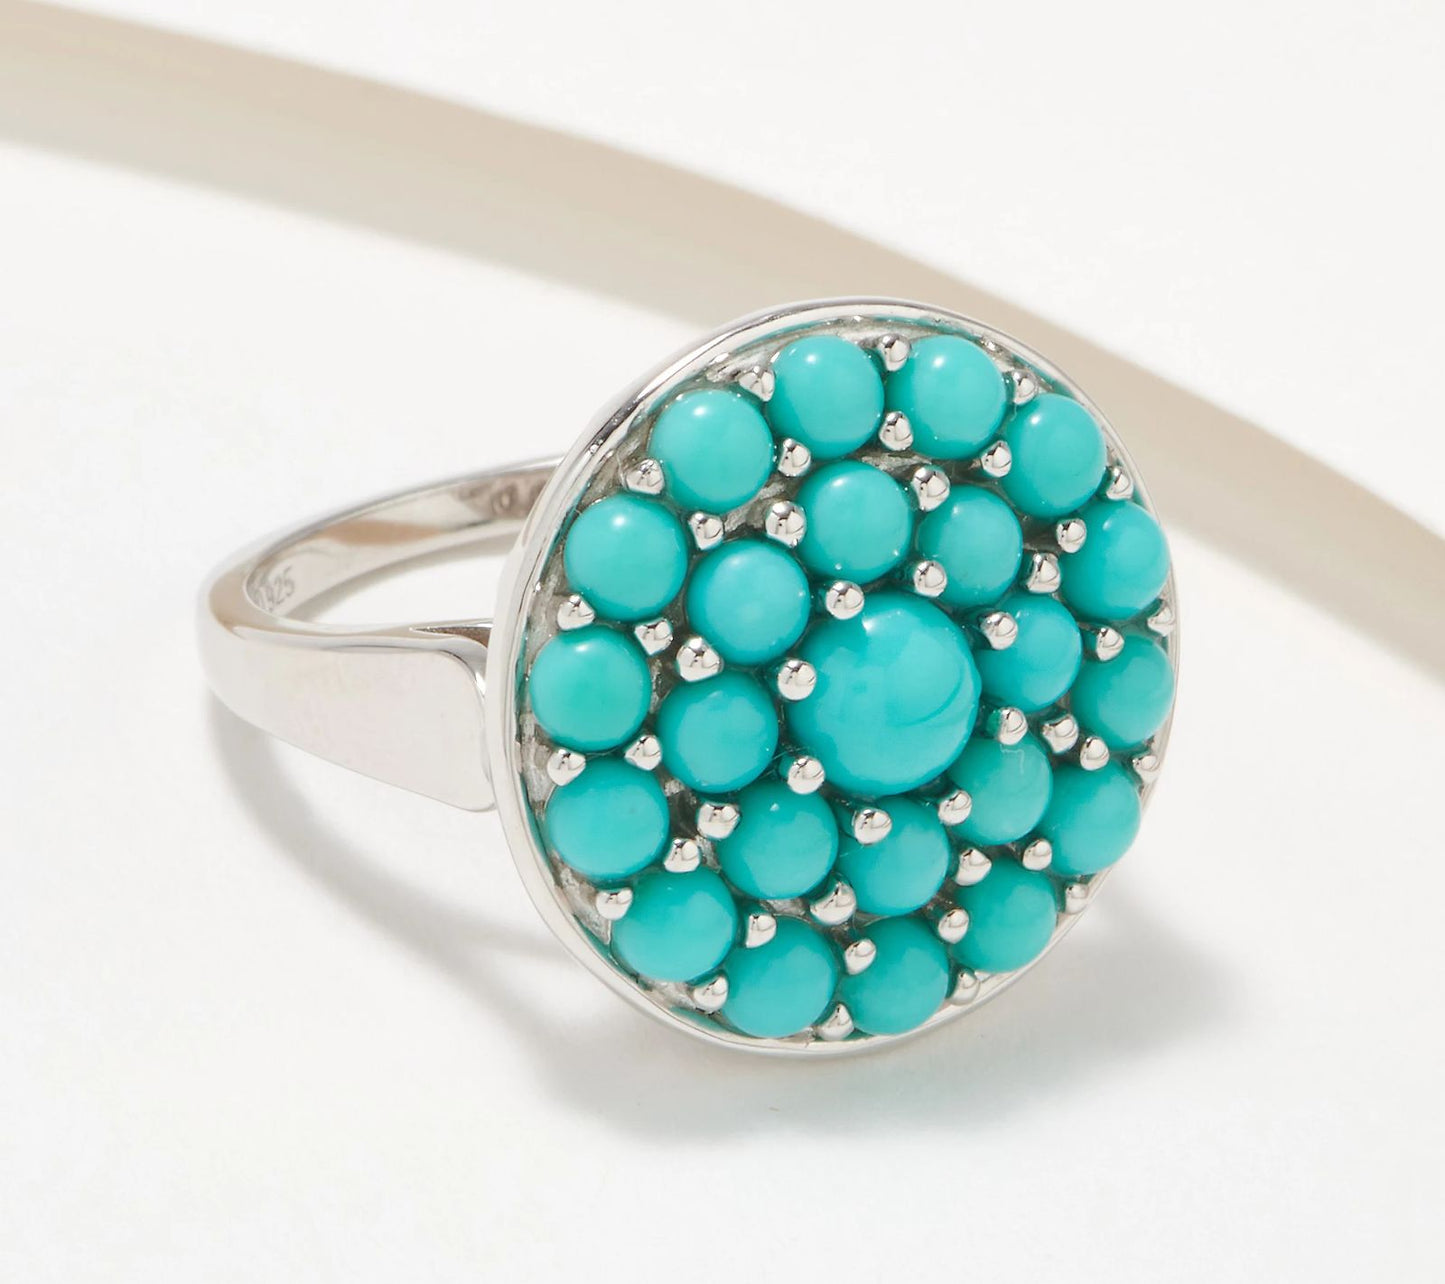 Affinity Gems Sleeping Beauty Turquoise Round Shape Ring Size 6 Sterling Silver